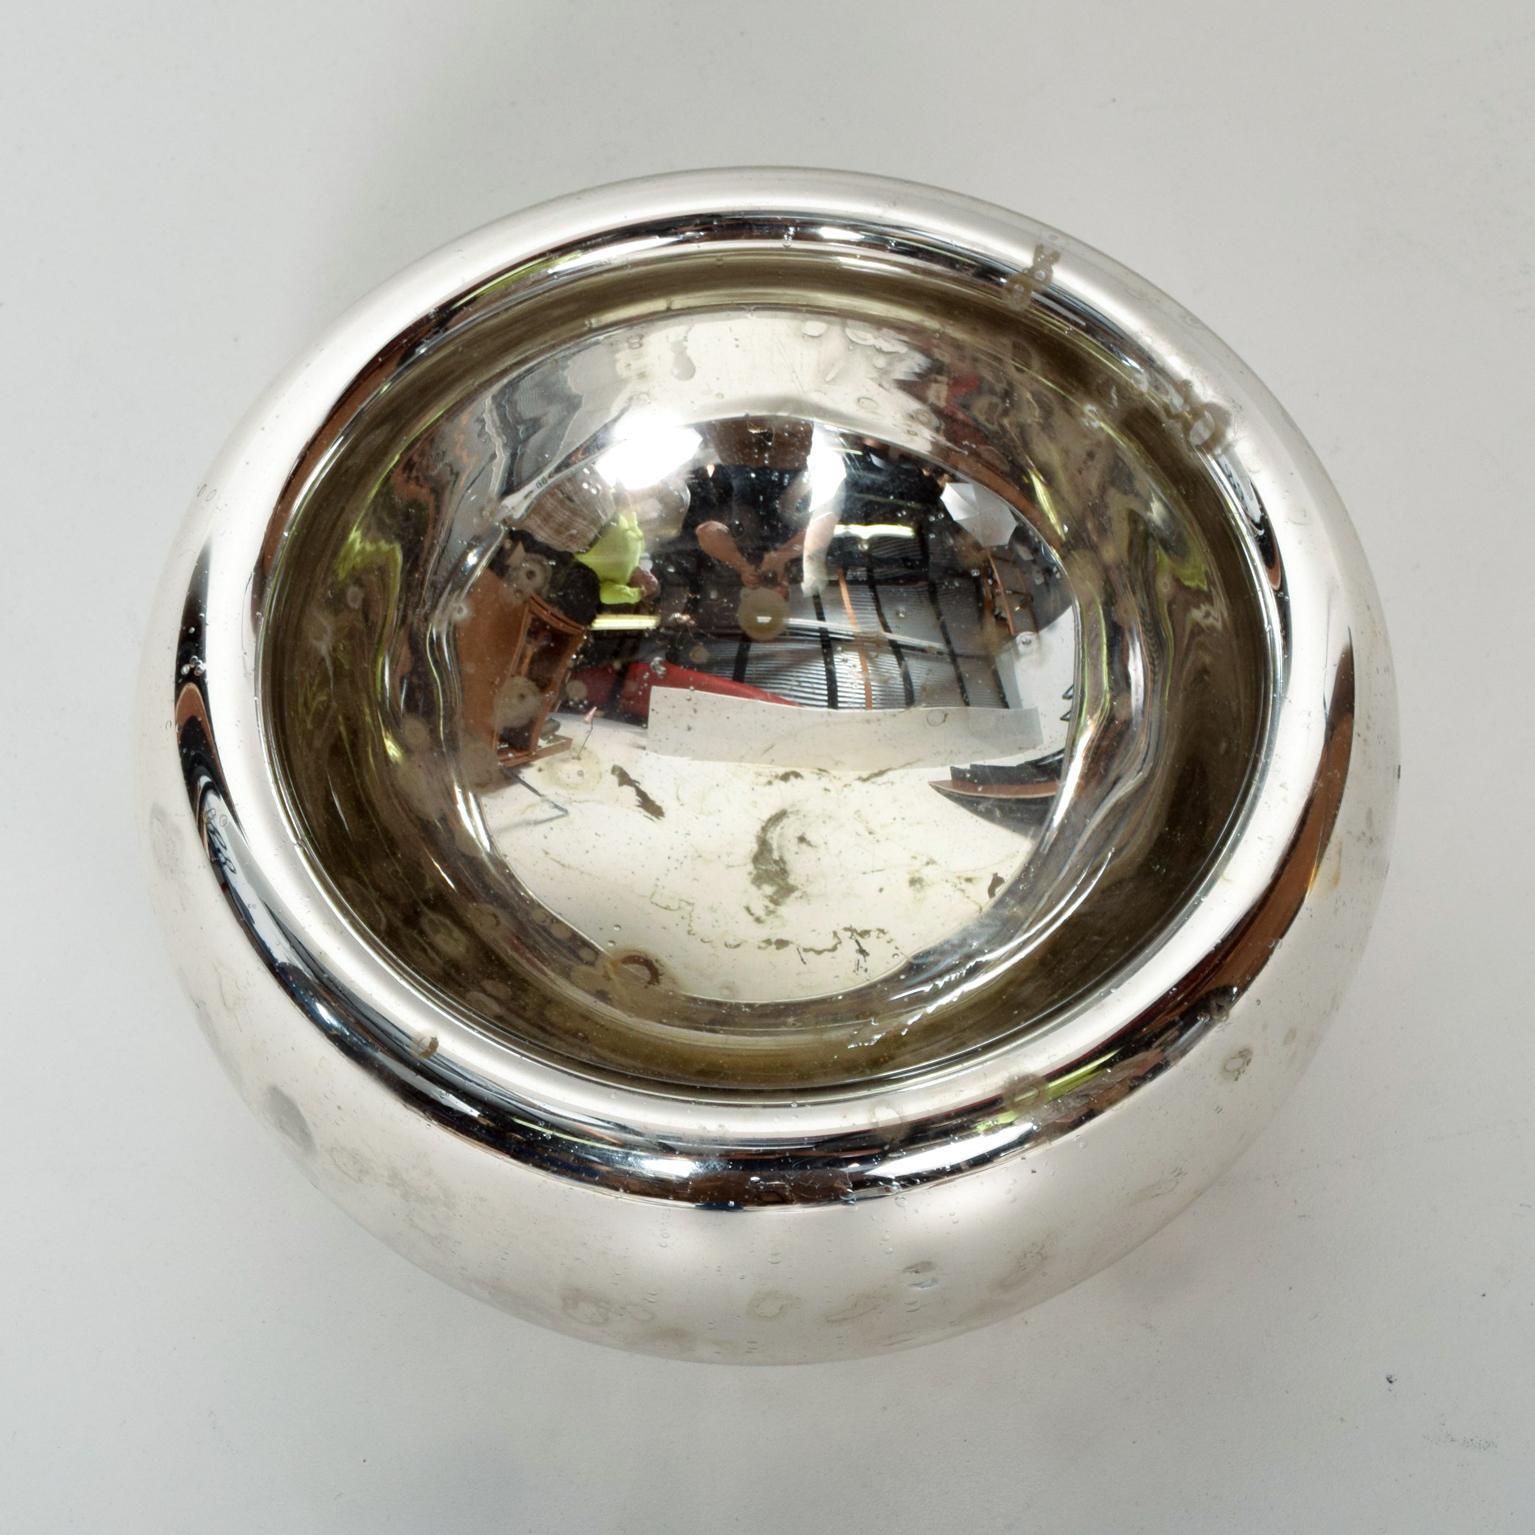 For your liking: Mid Century Modern Small Glass Mercury Bowl in Silver.
Ref: ACCGM1202194
Original unrestored vintage condition.
Dimensions are: 4